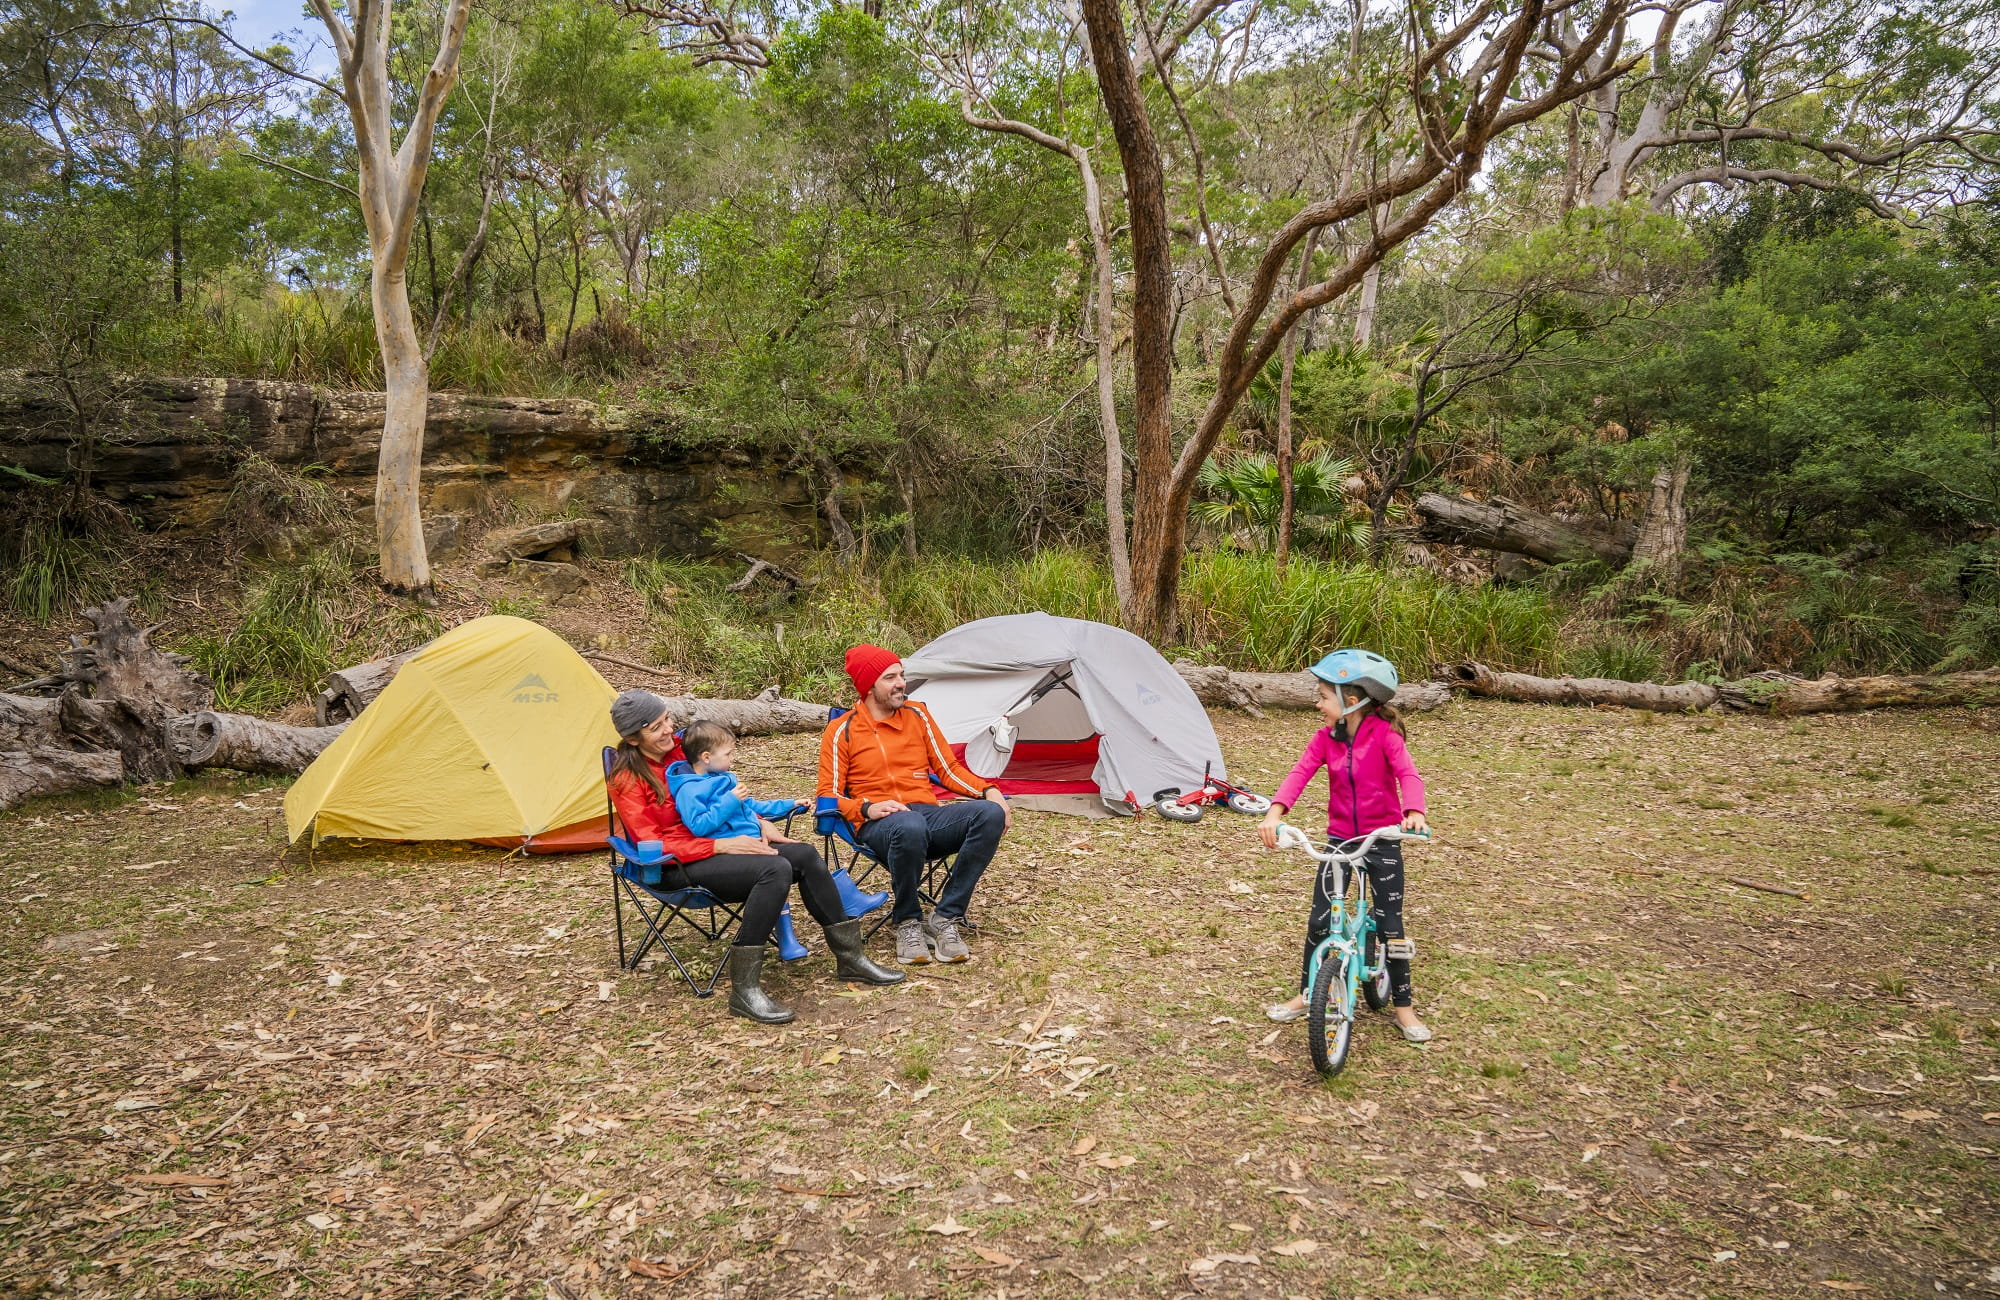 Bonnie Vale campground, Royal National Park. Photo: John Spencer/OEH